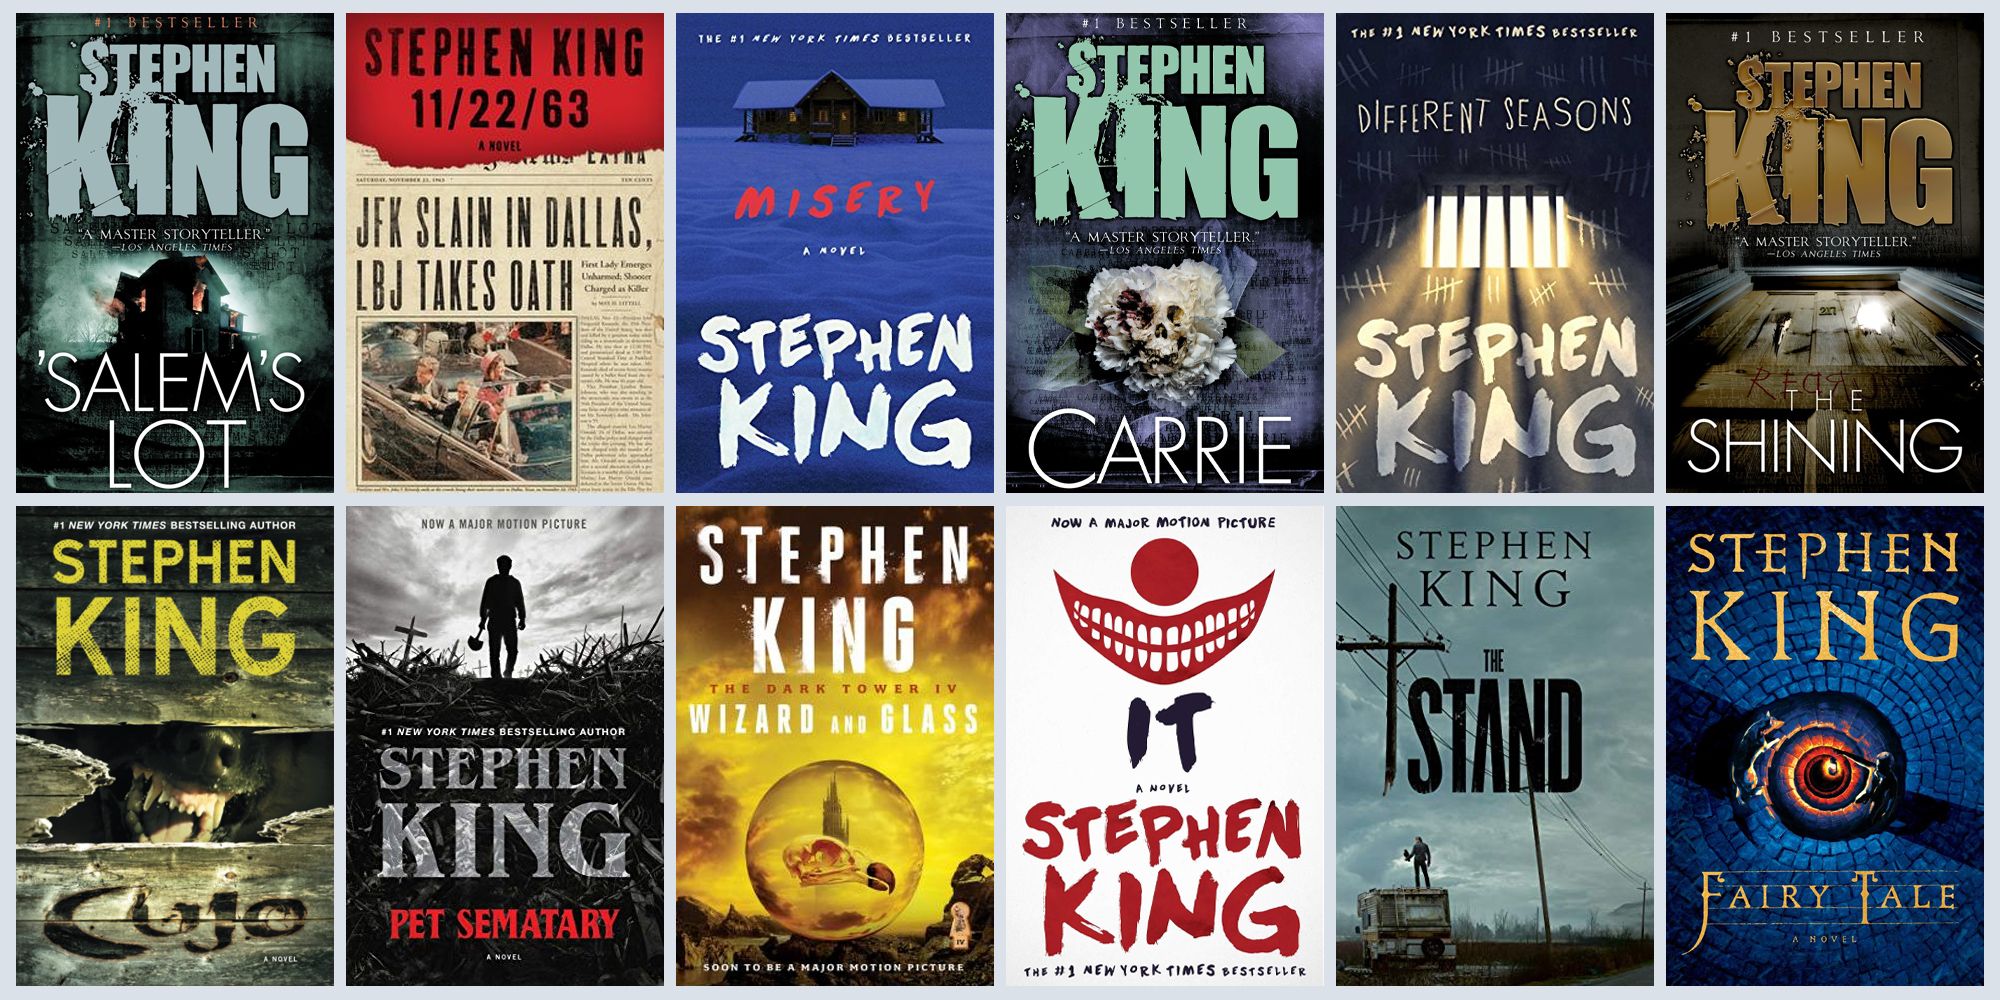 Which Stephen King books are the most popular?